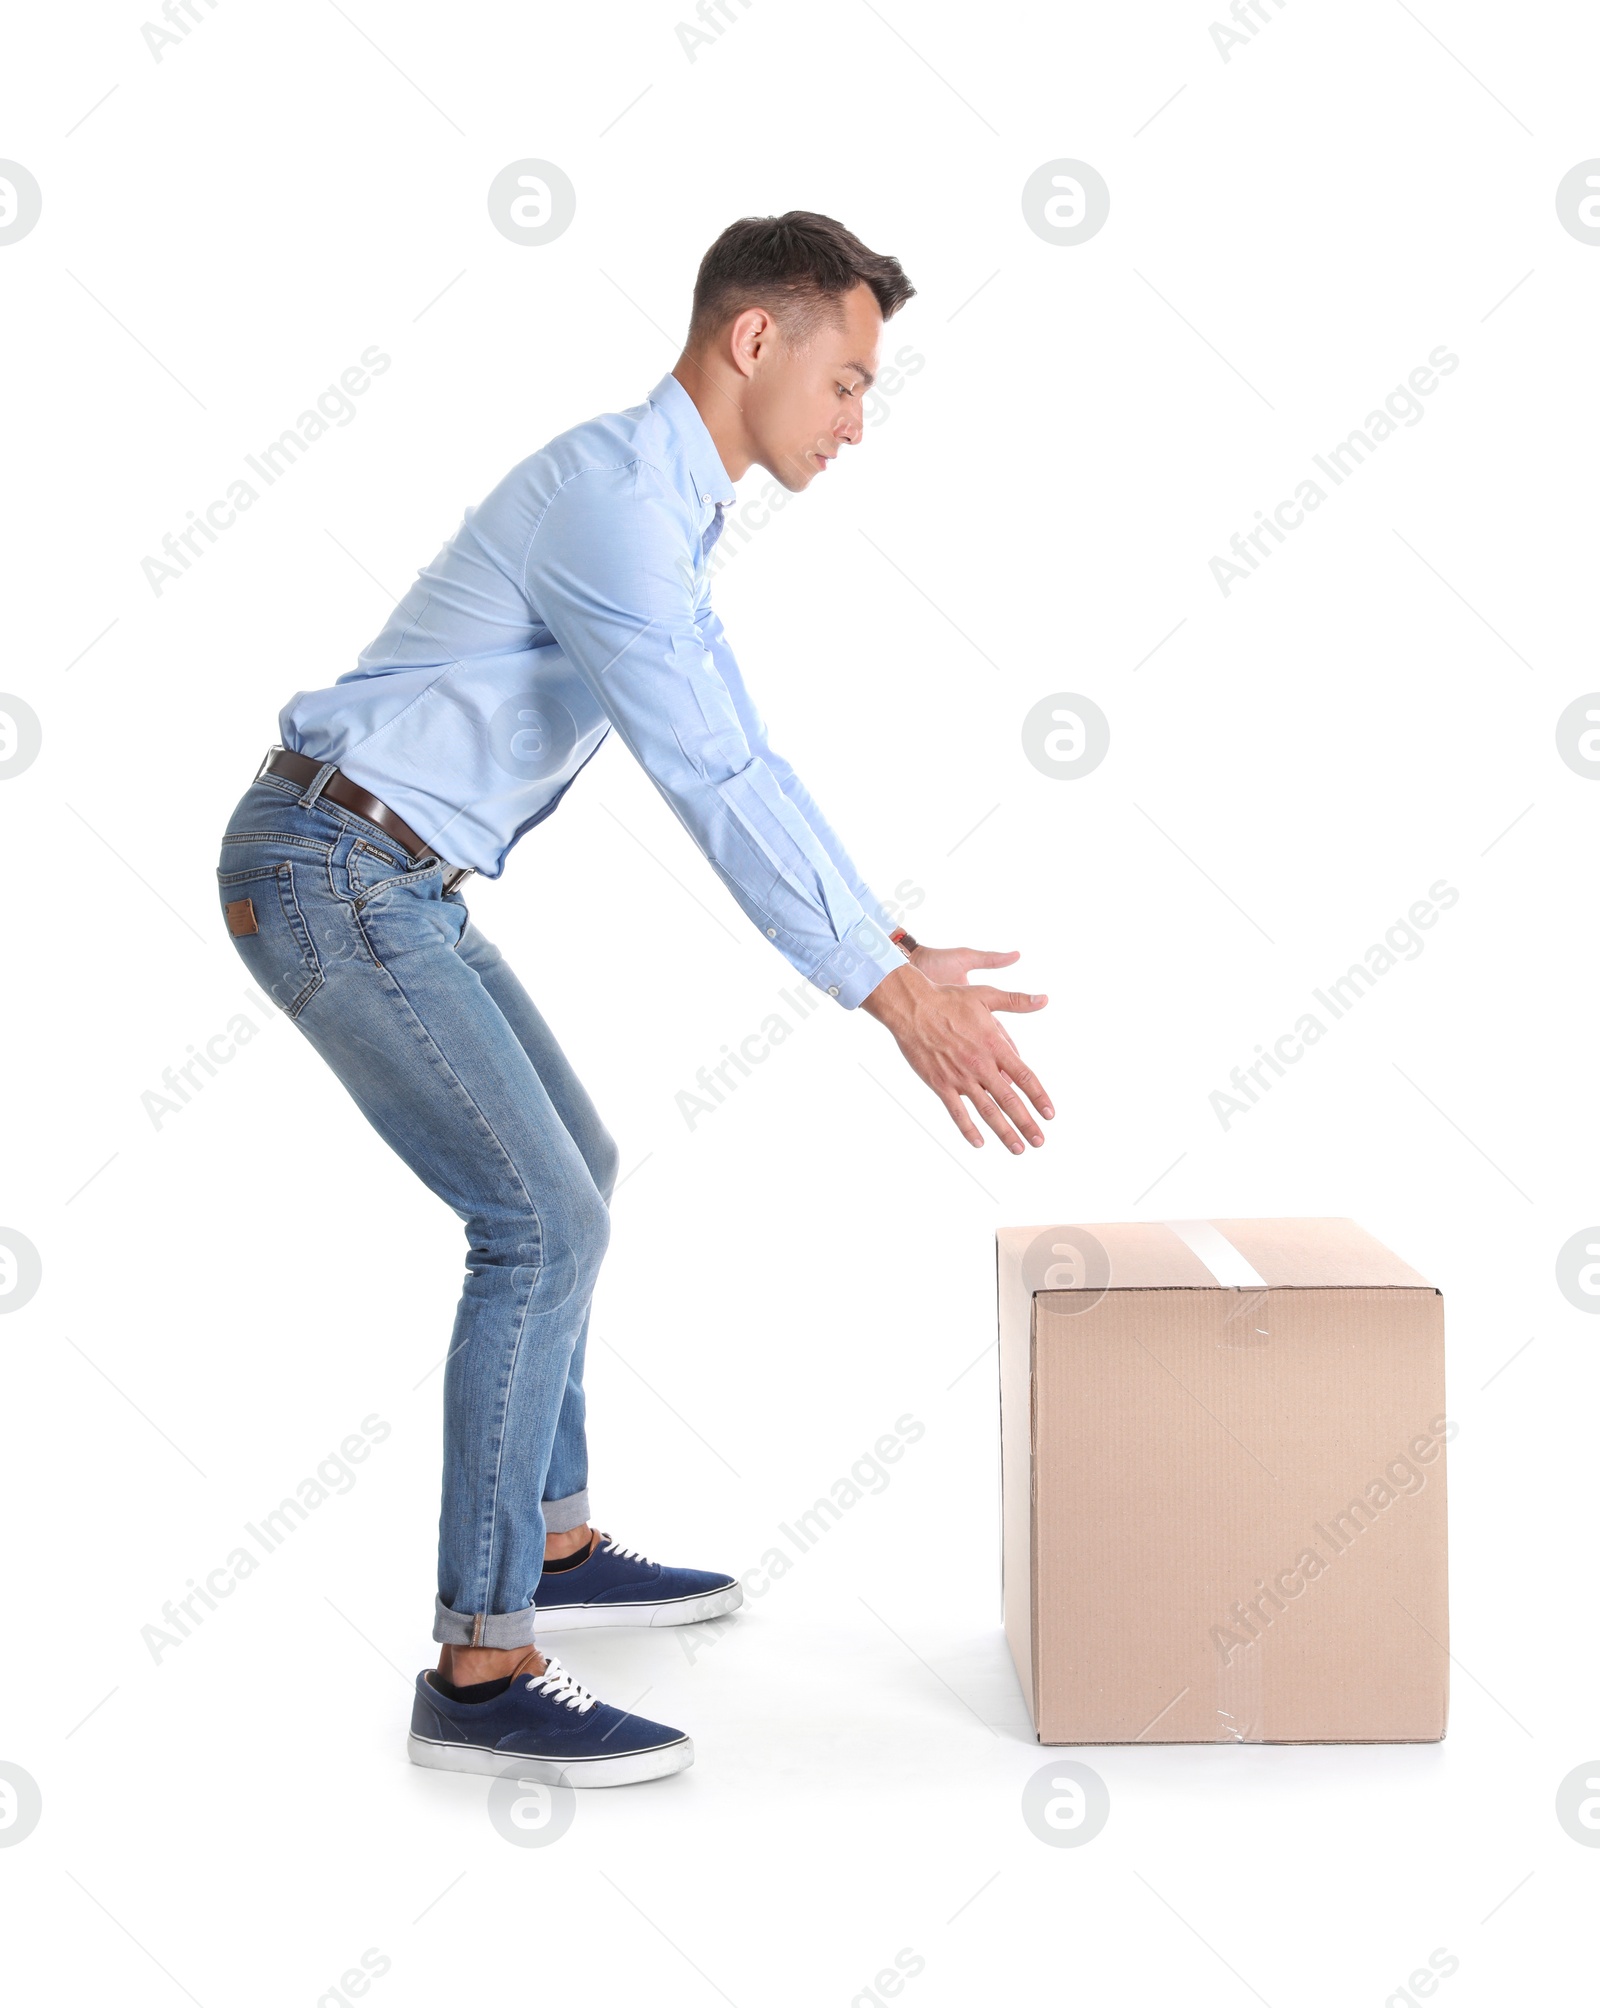 Photo of Full length portrait of young man lifting heavy cardboard box on white background. Posture concept